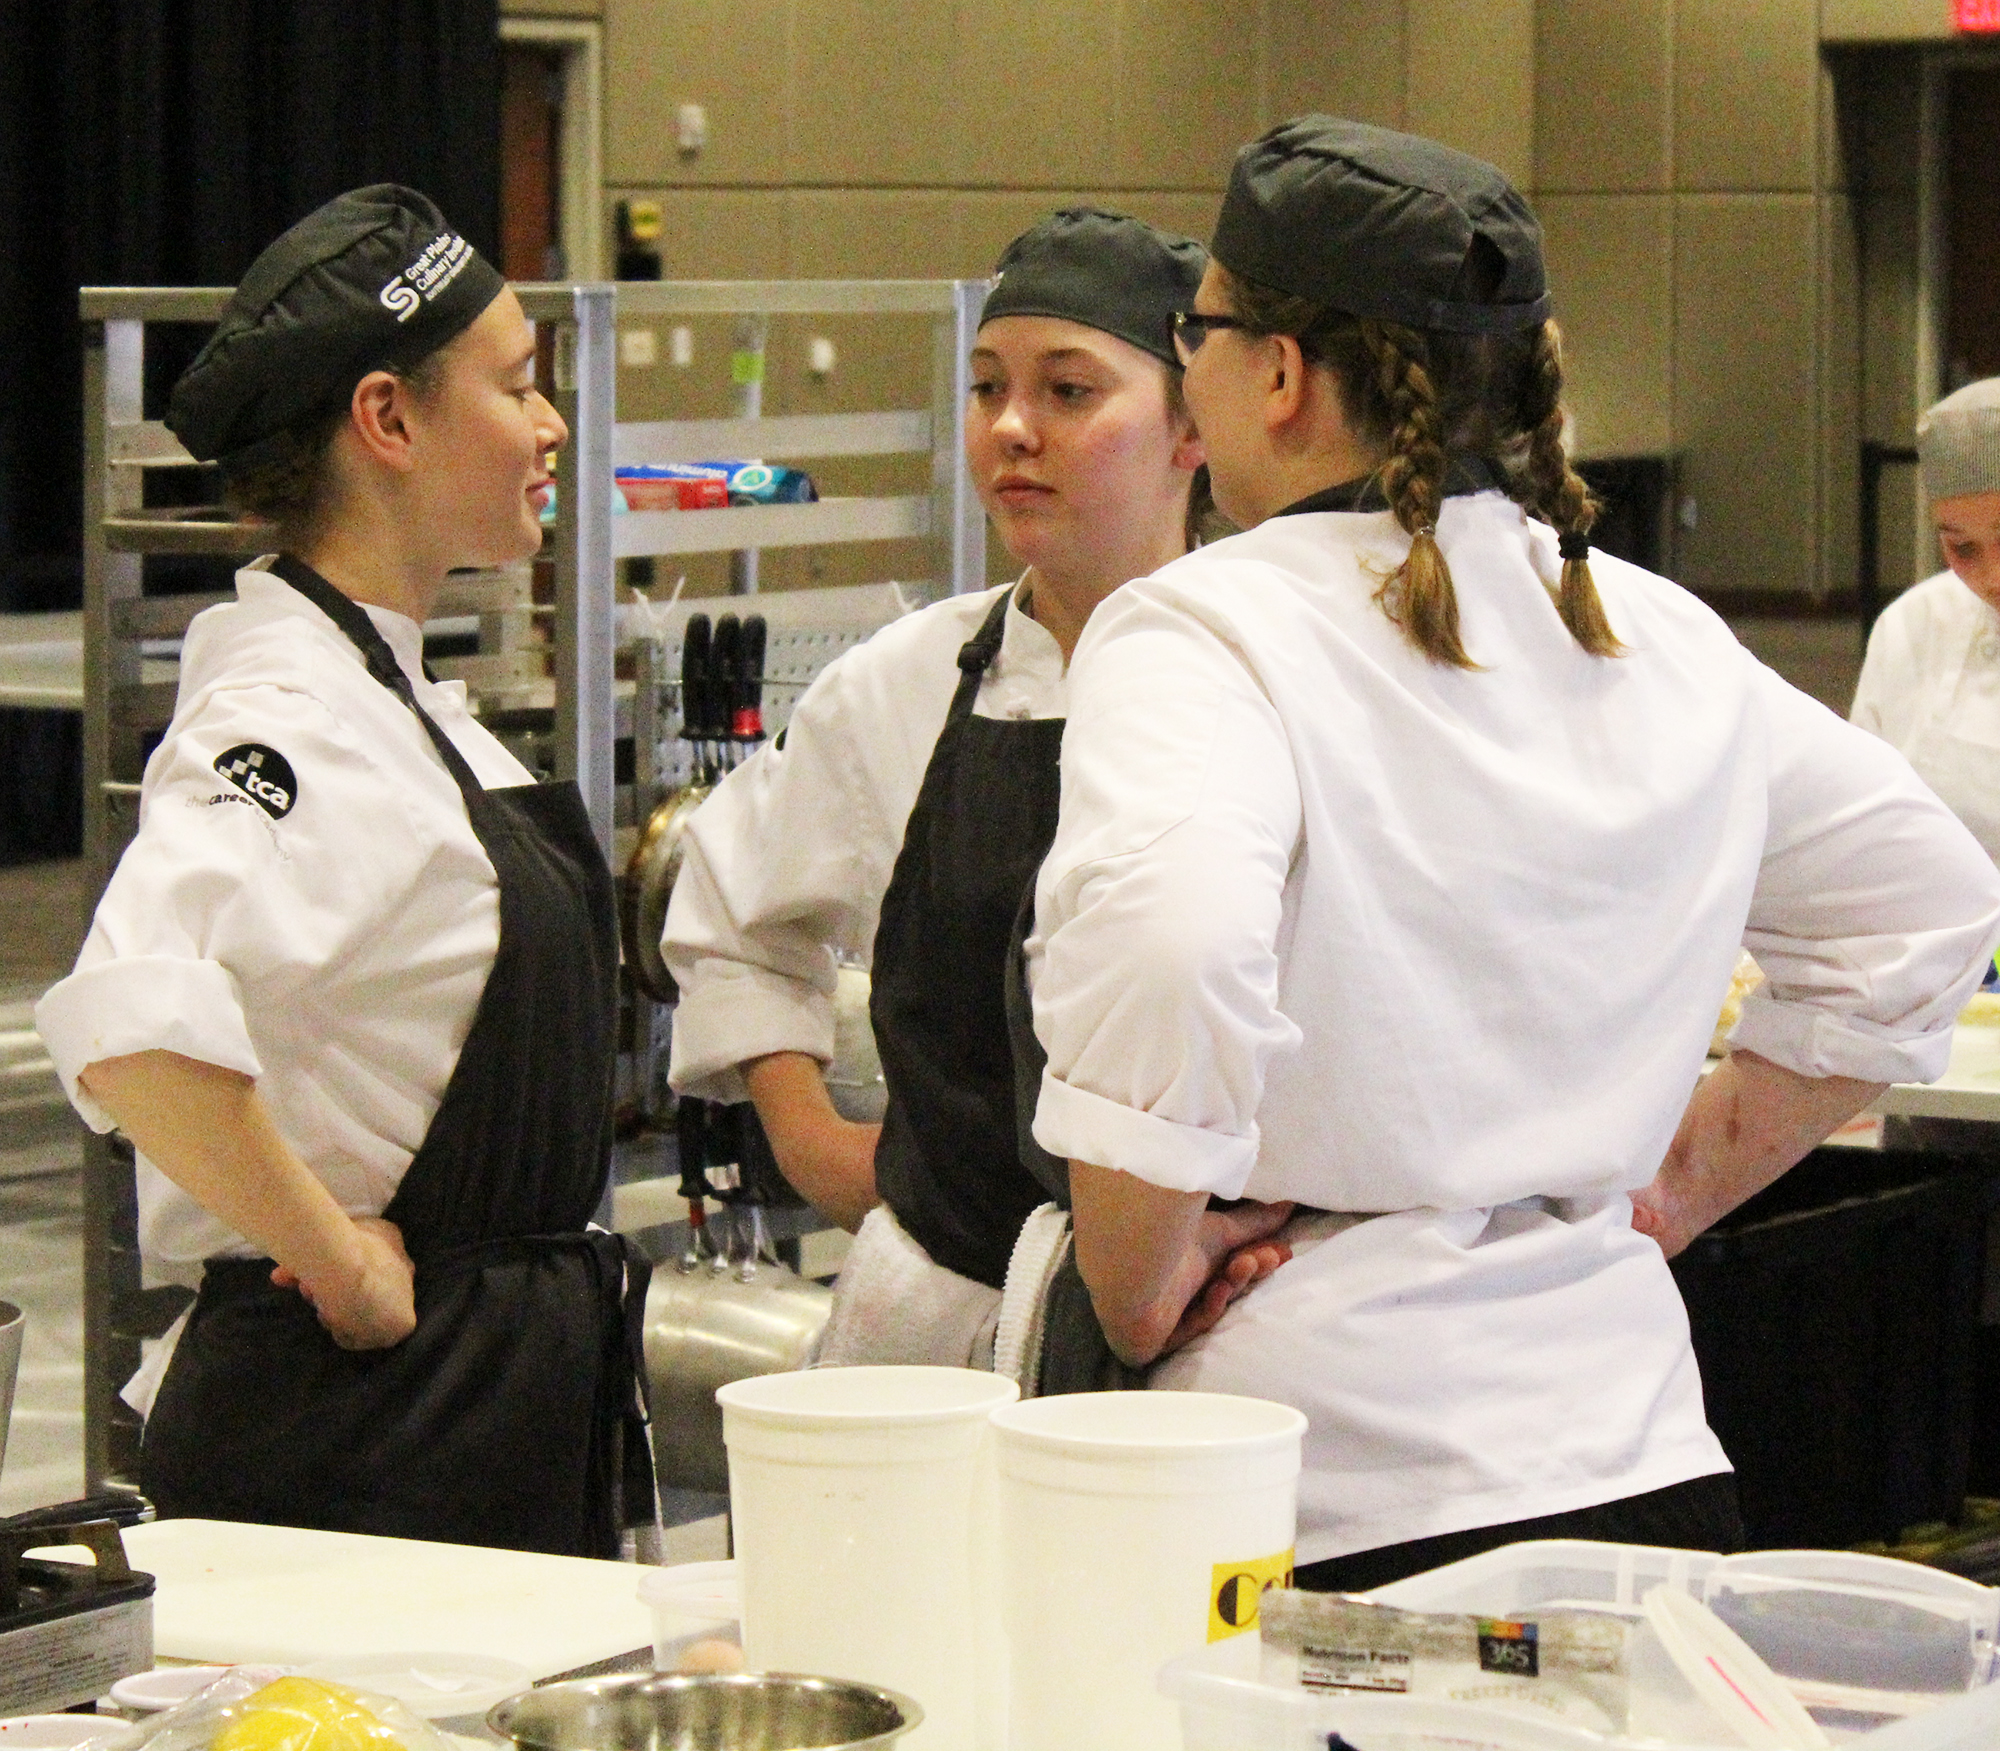 Sizzling with Skill: ProStart Chefs Take Center Stage at State Contest ...